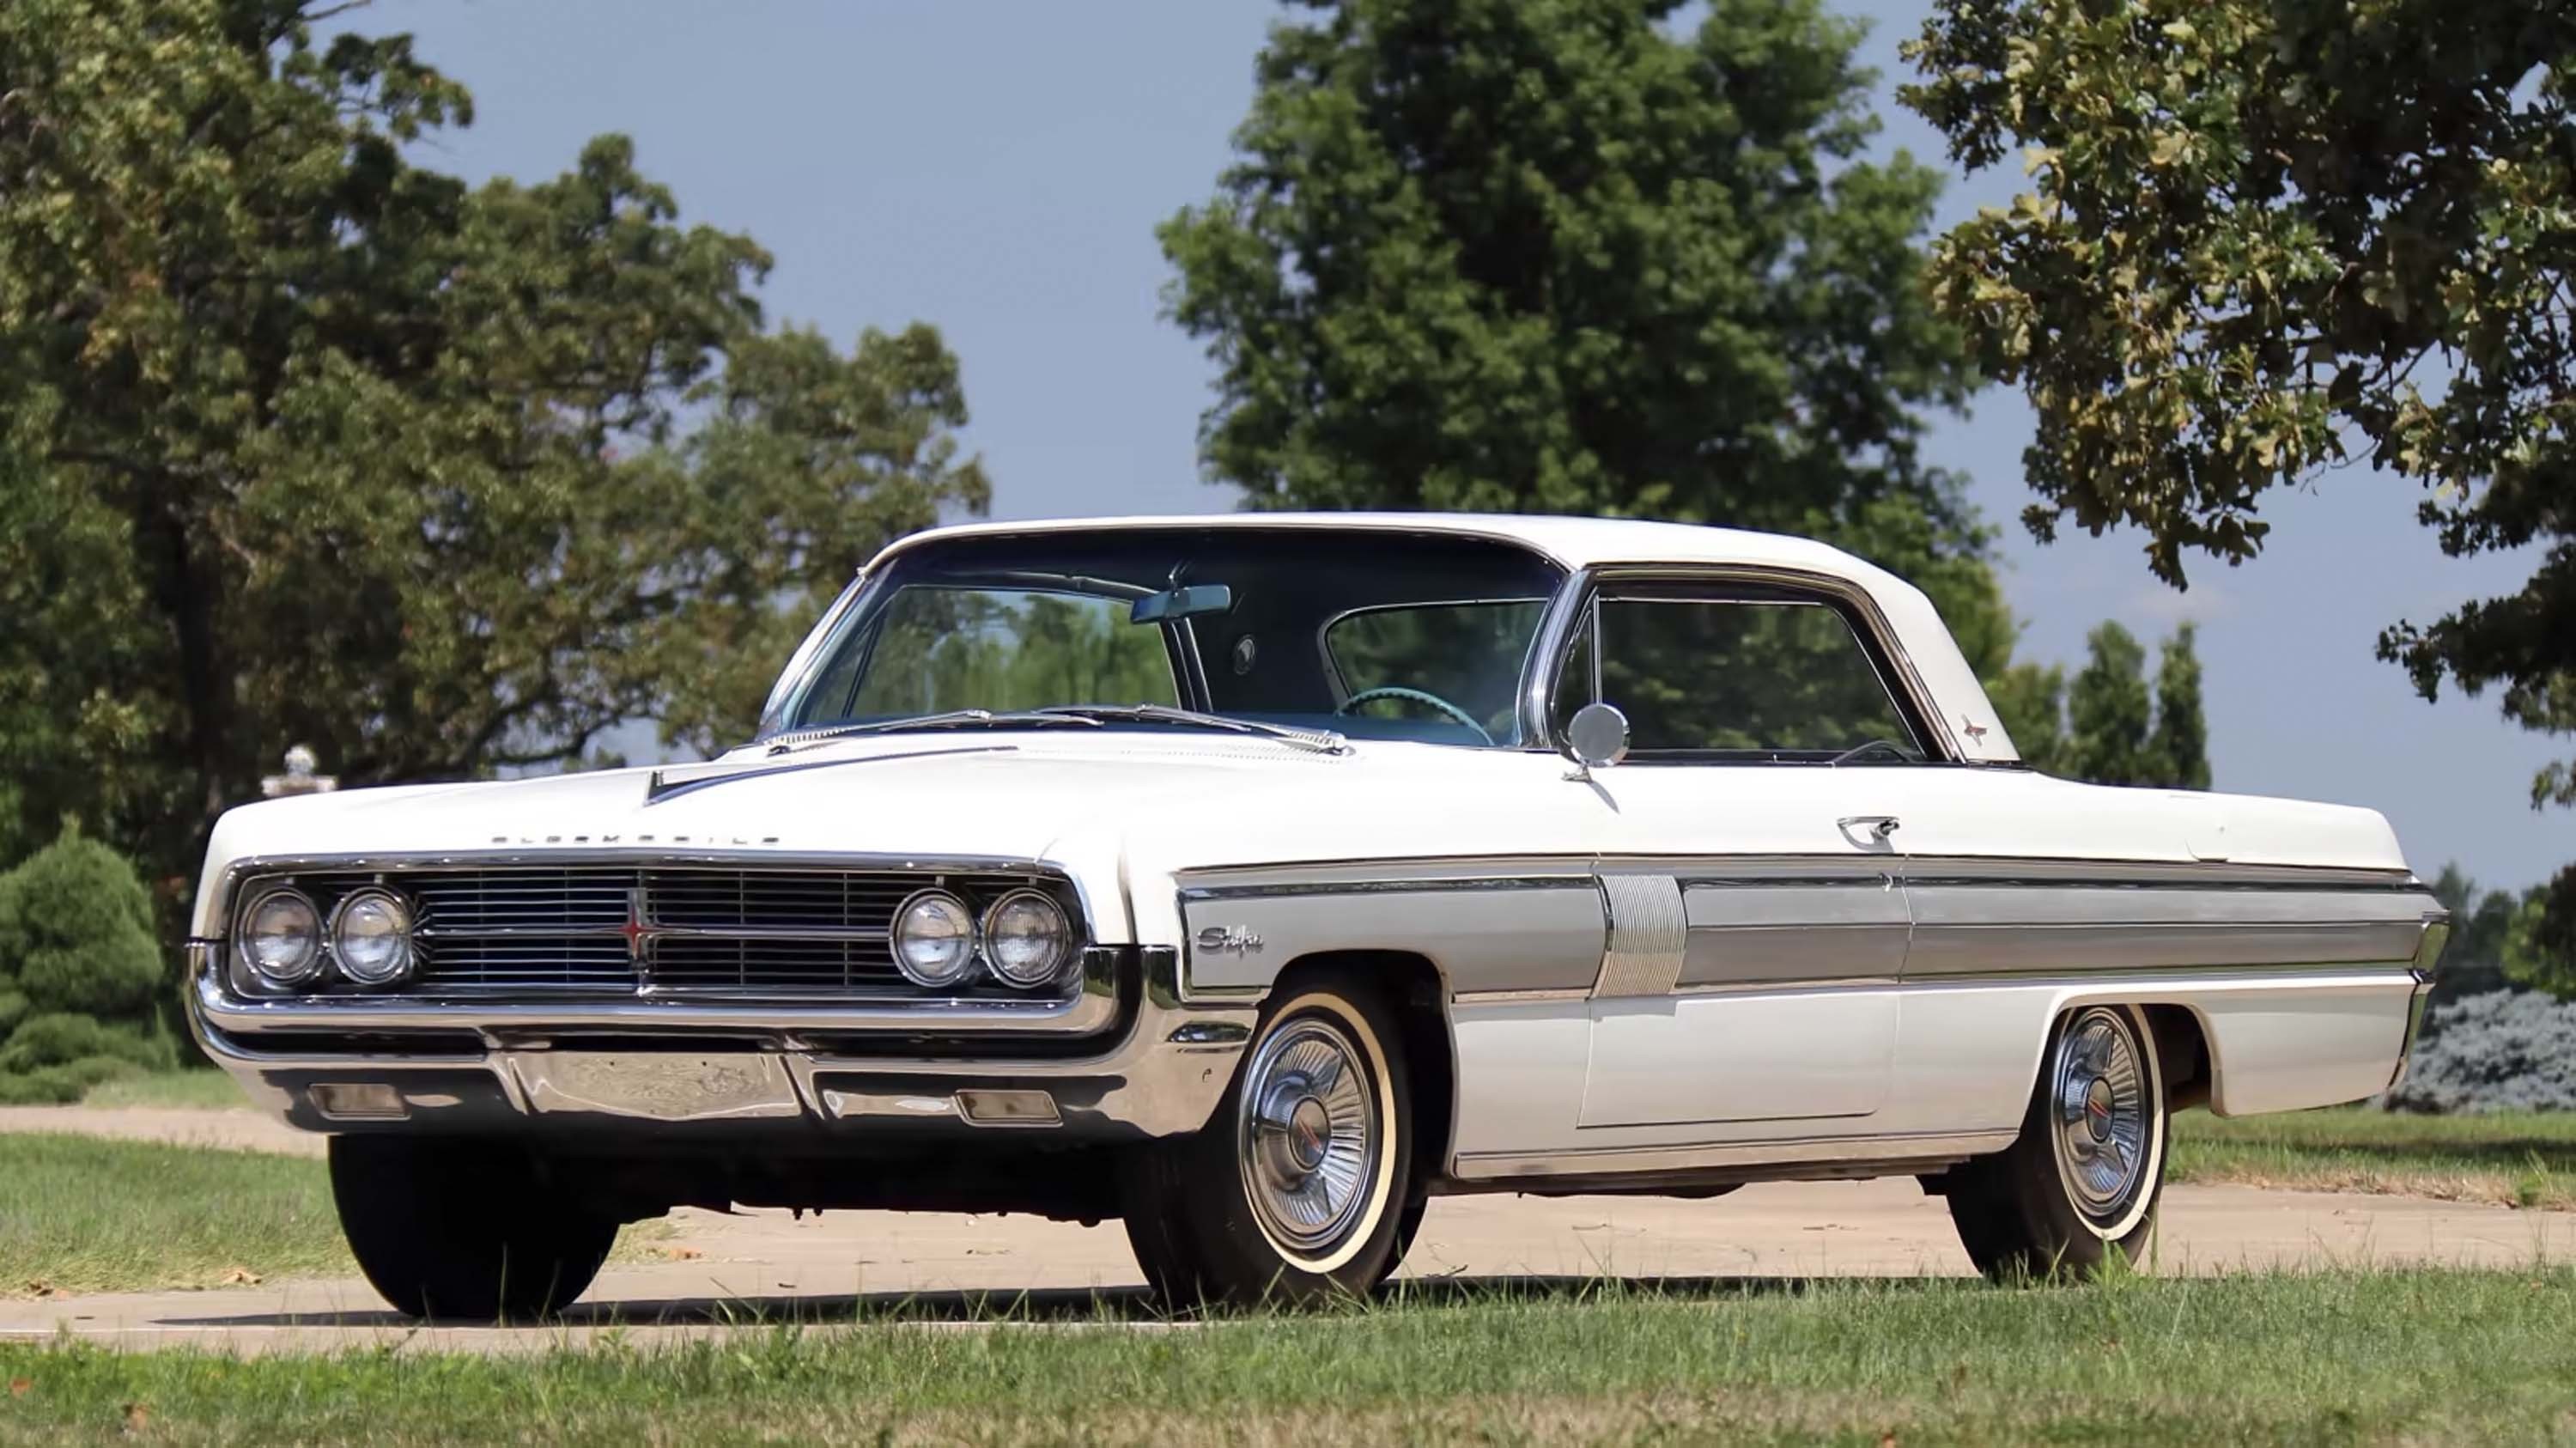 The 1962 Oldsmobile Starfire Makes For An Appealing Collectible